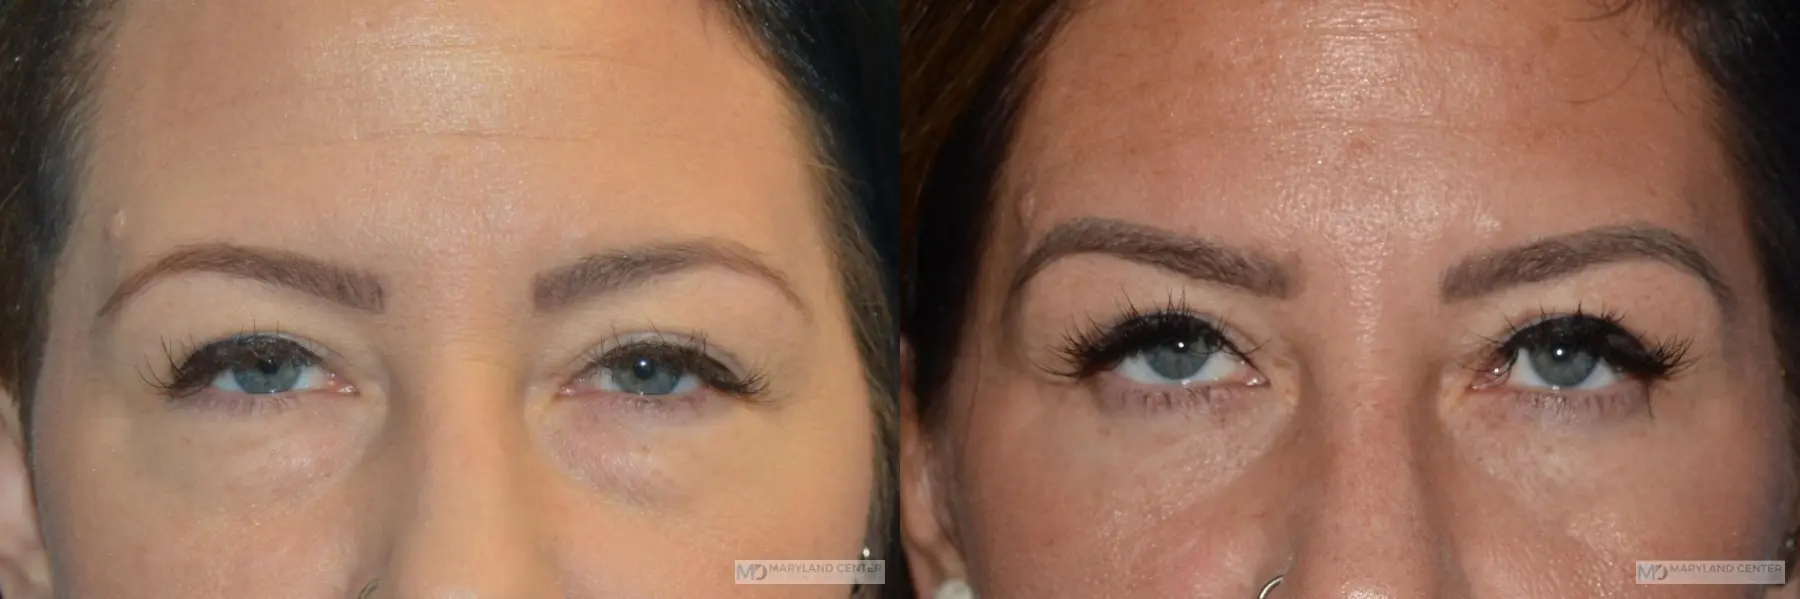 Blepharoplasty: Patient 1 - Before and After  